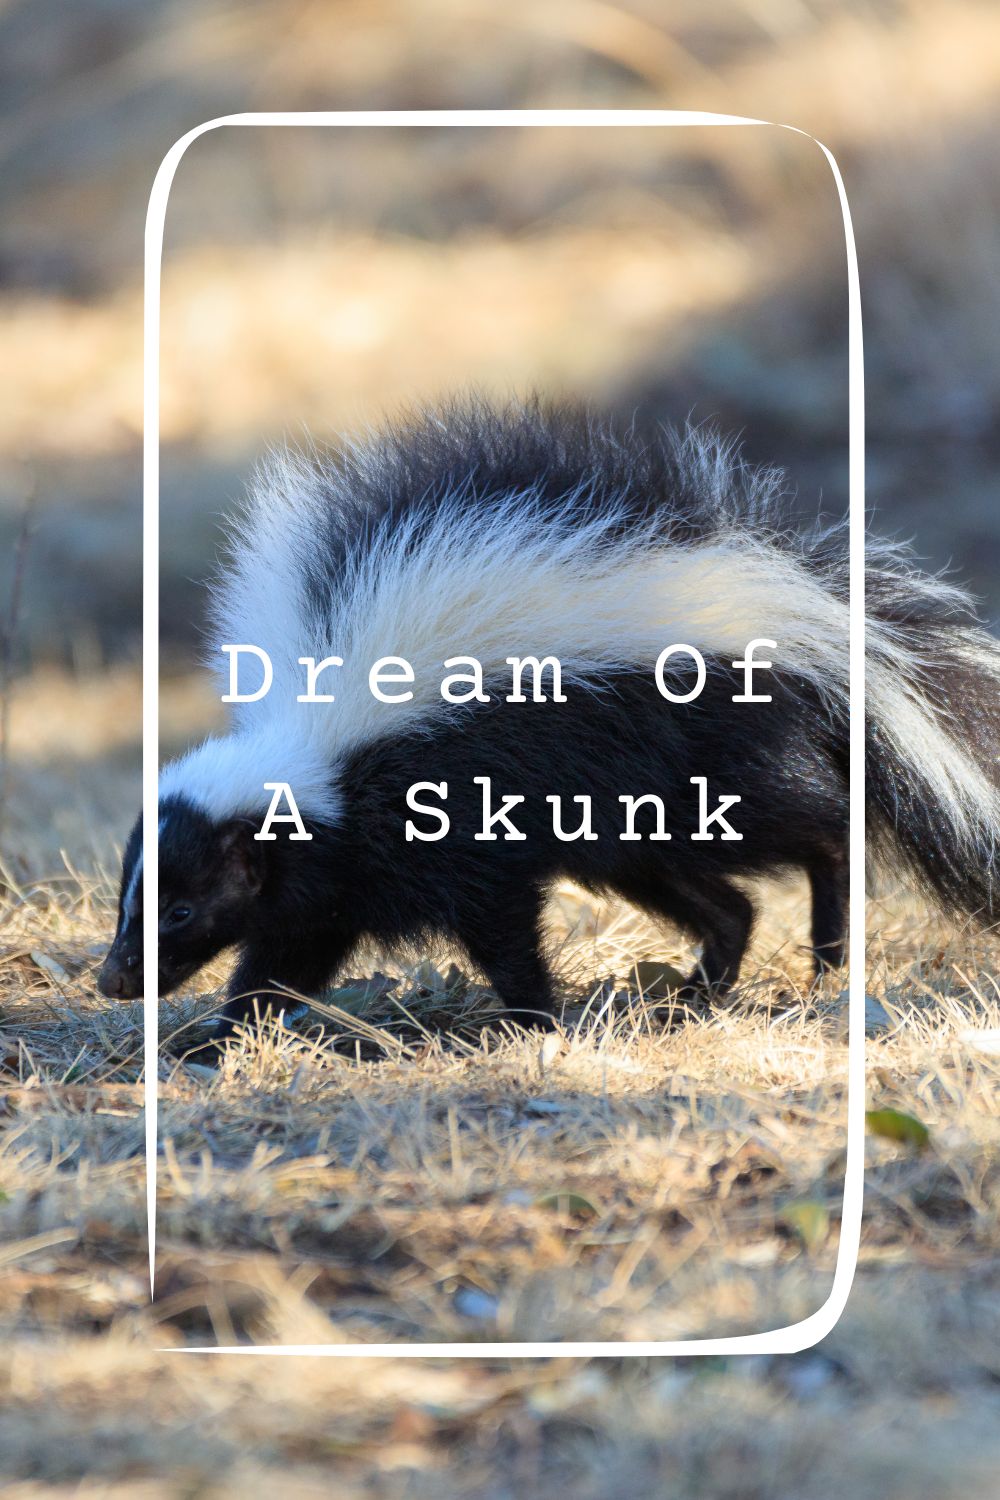 Dream Of A Skunk Meanings 2